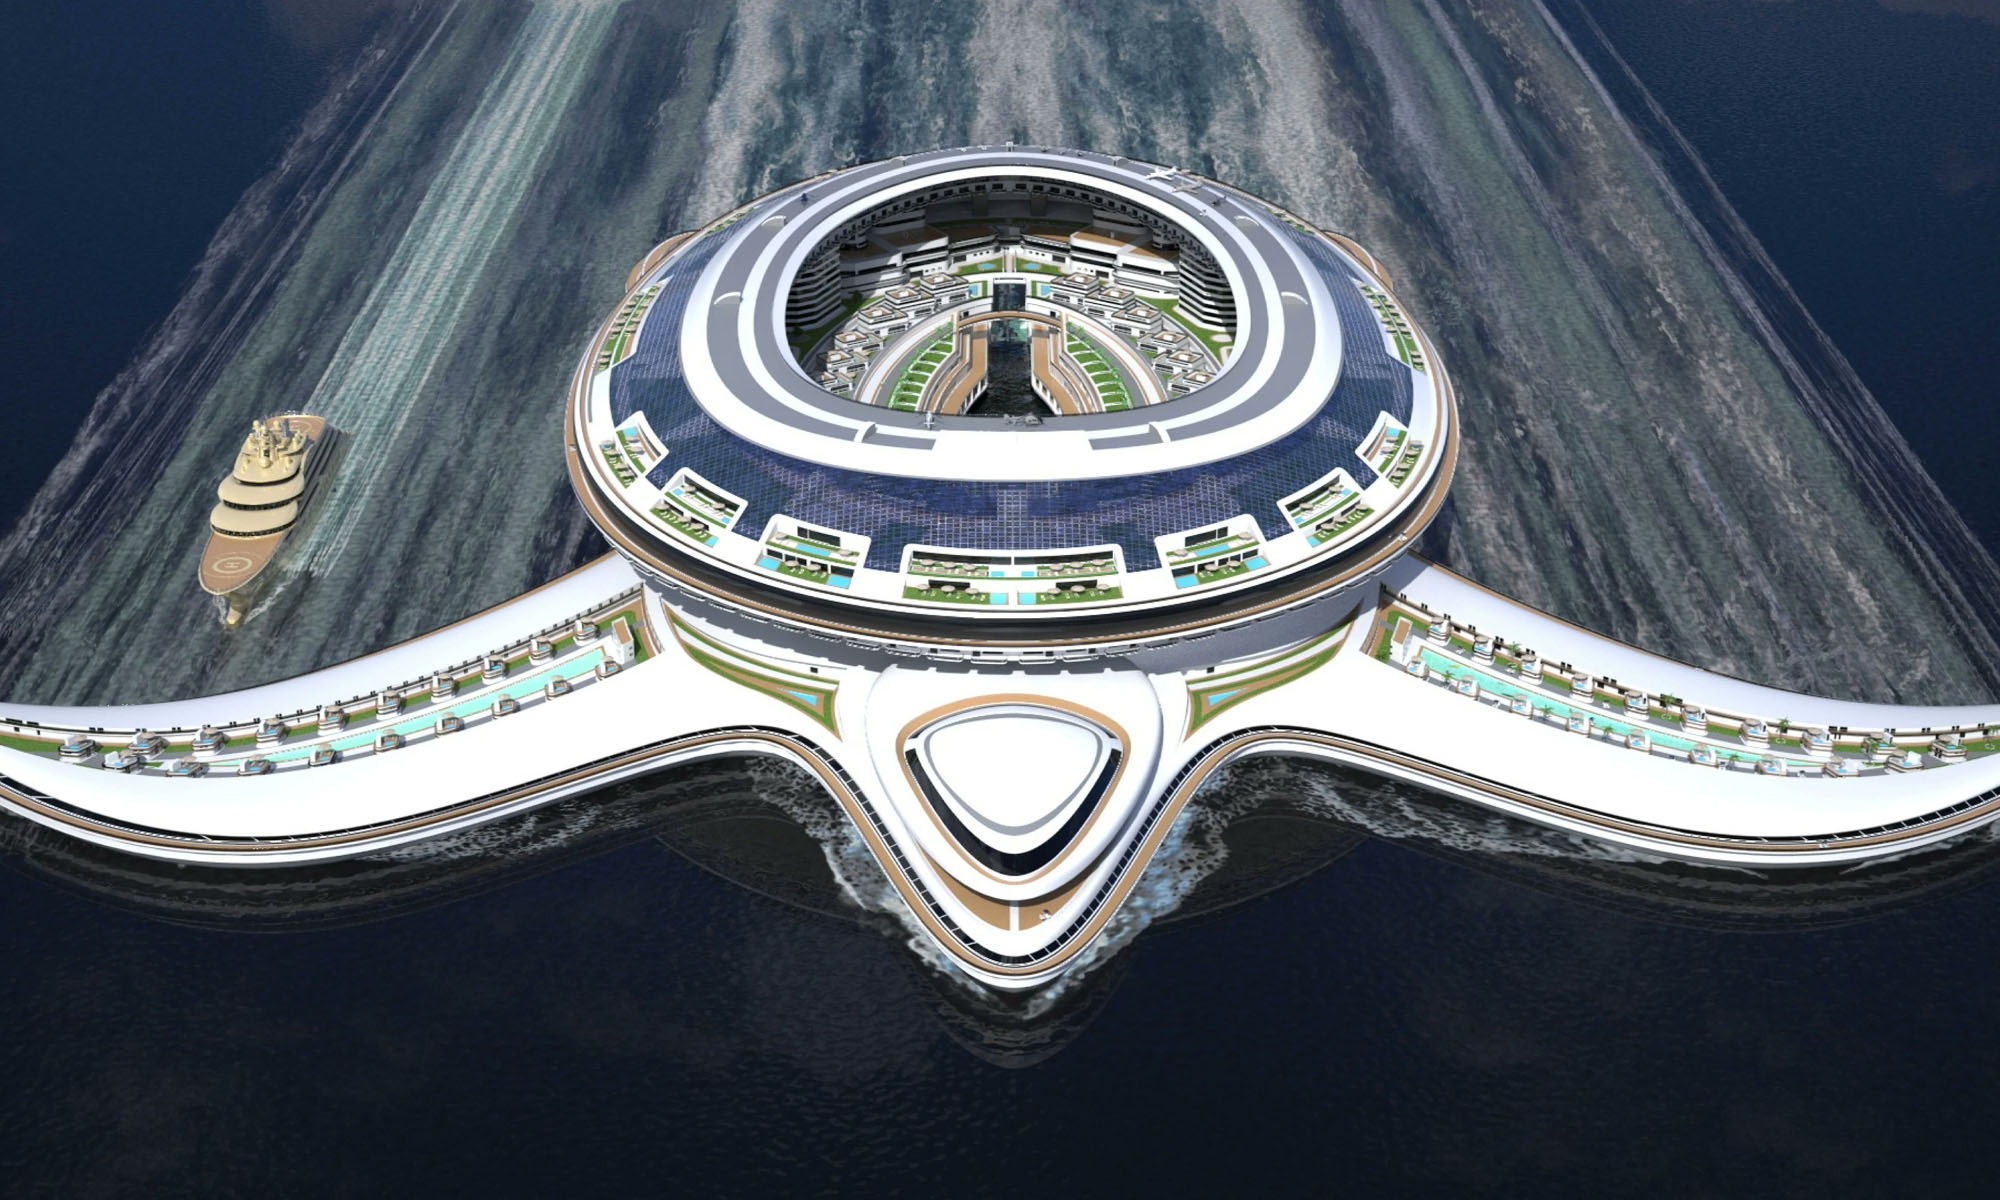 saudi arabia will be home to a $5bn floating city